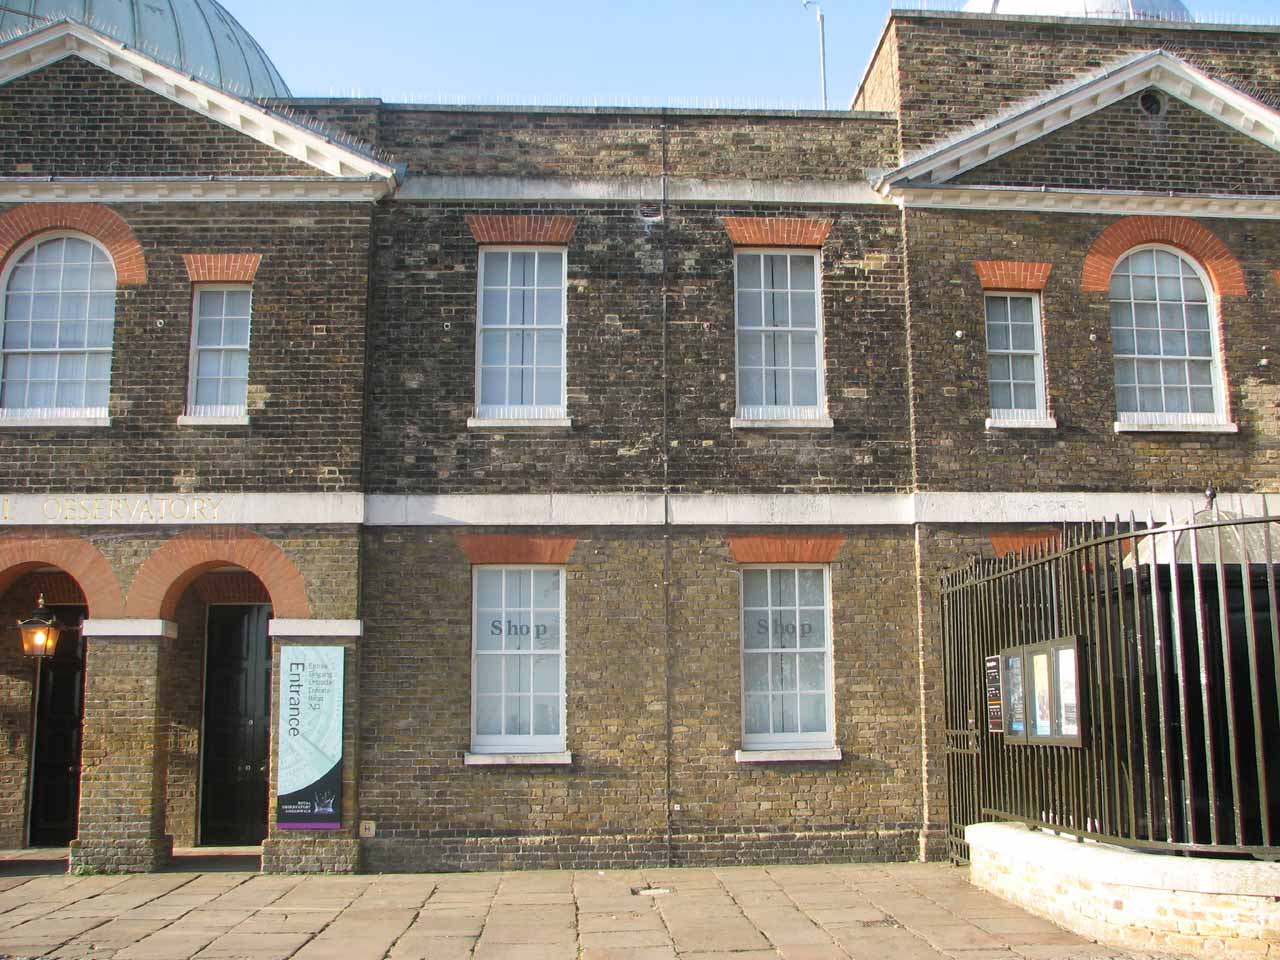 The Royal Observatory Greenwich - where east meets west: The Meridian